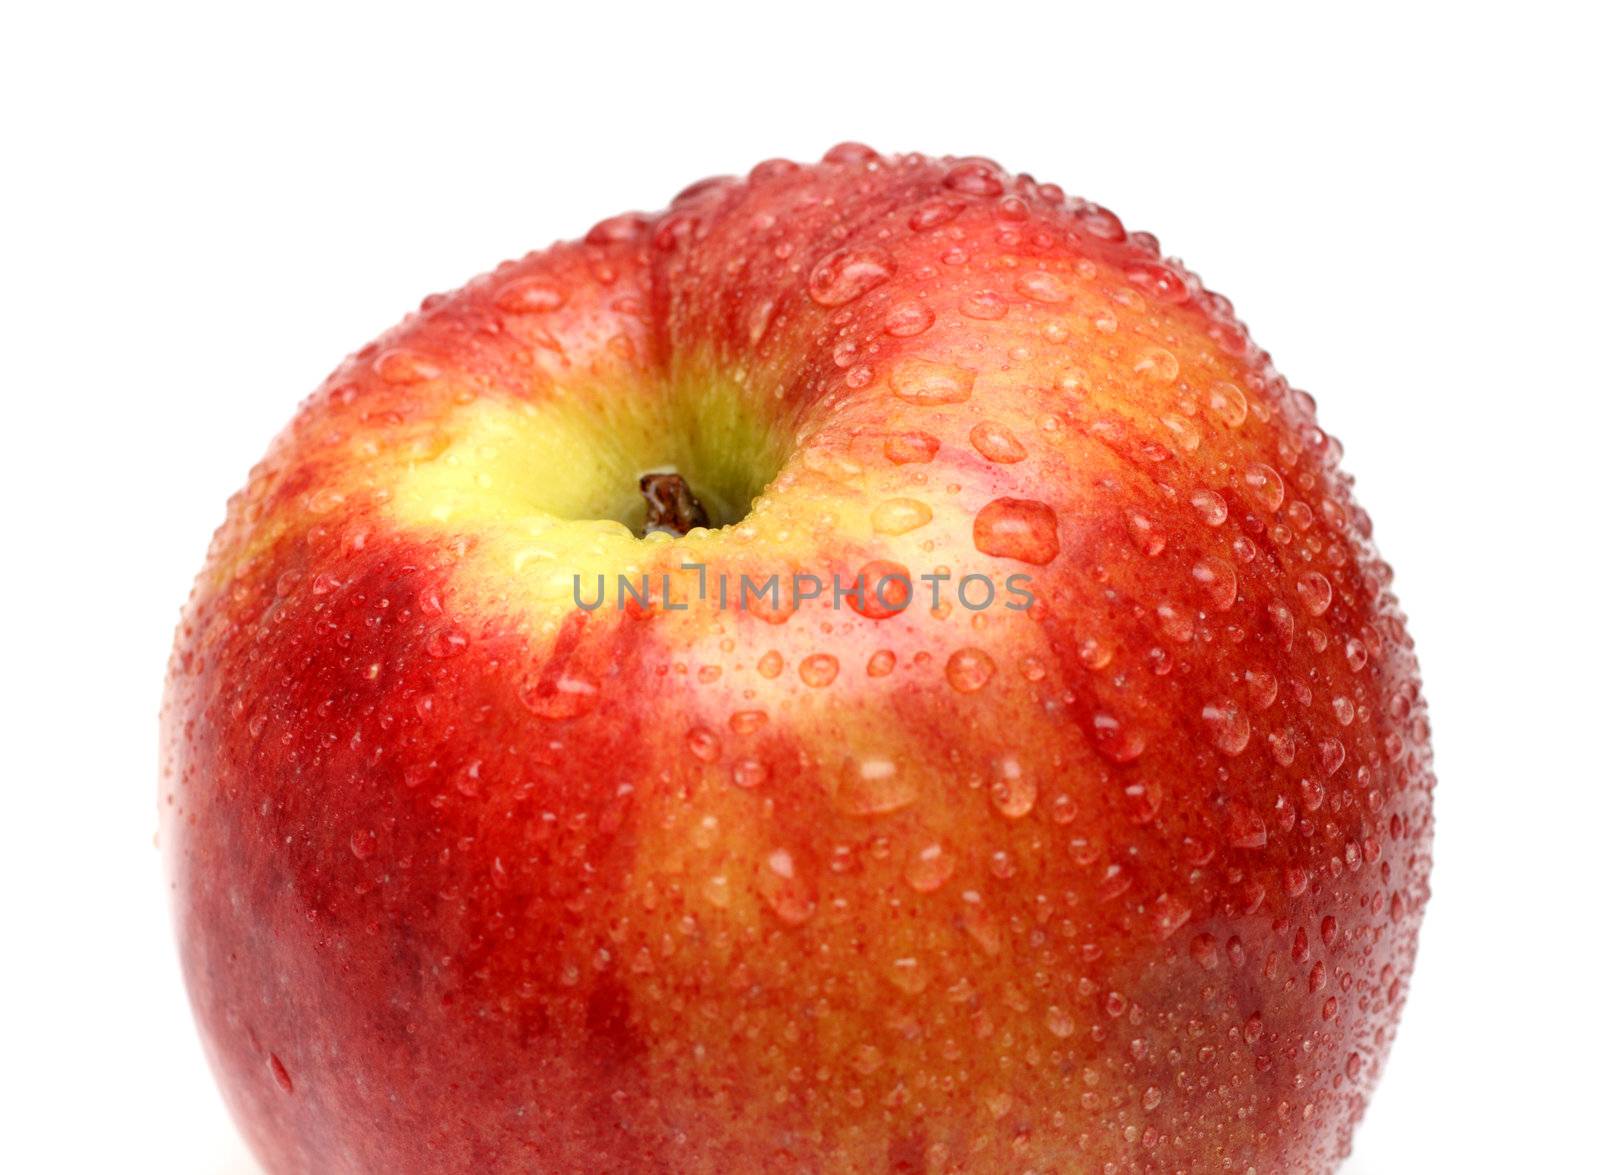 wet red apple with water drops close-up